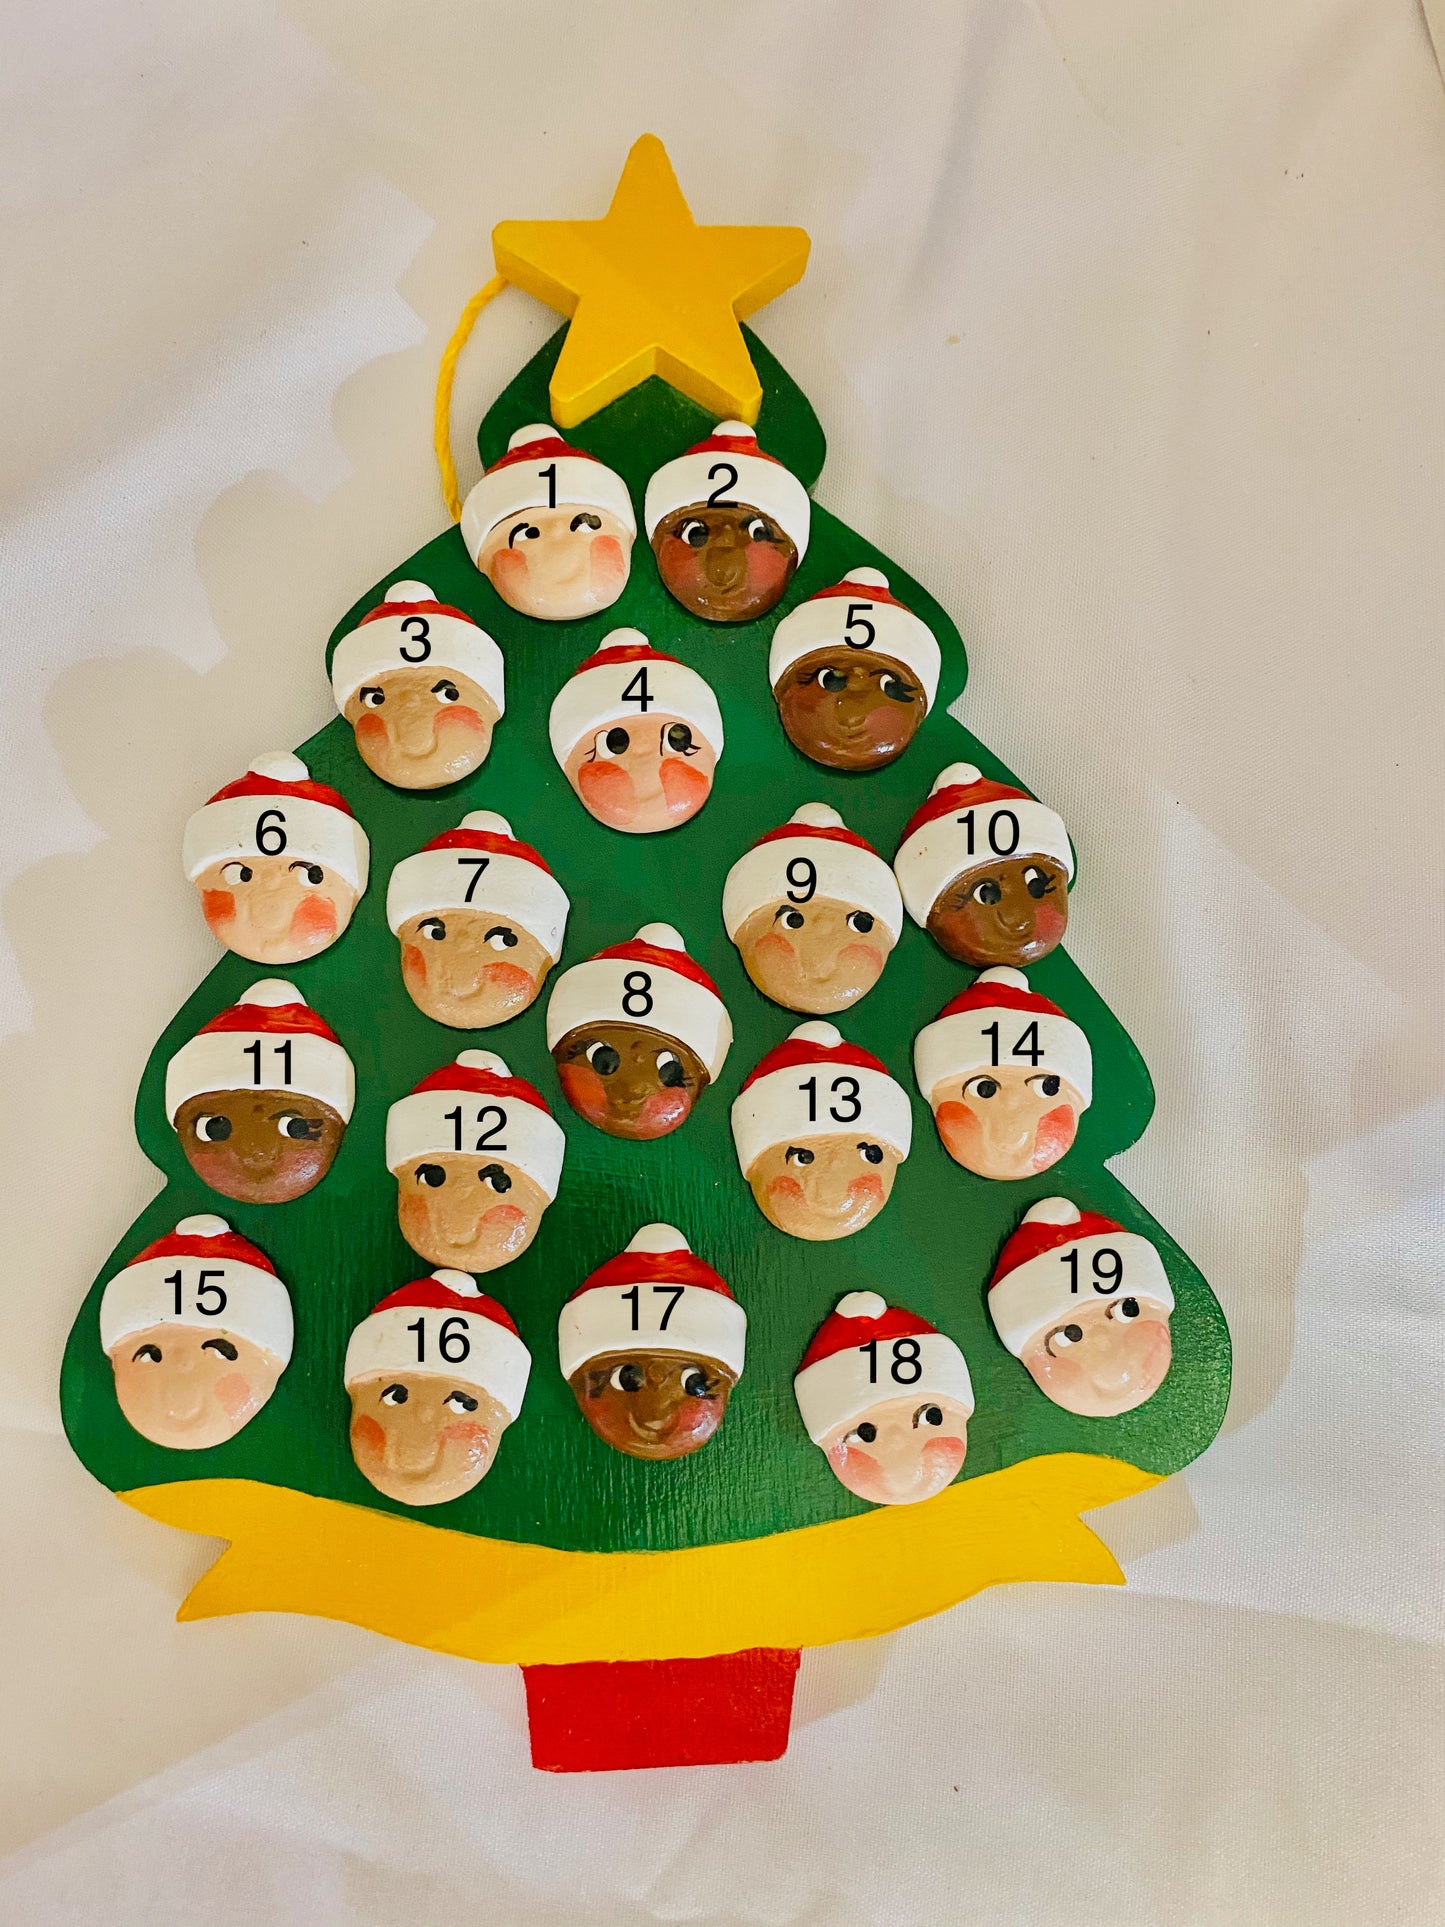 Personalized Ornament 19 Santa Faces on a Christmas Tree 7.5" x 6""